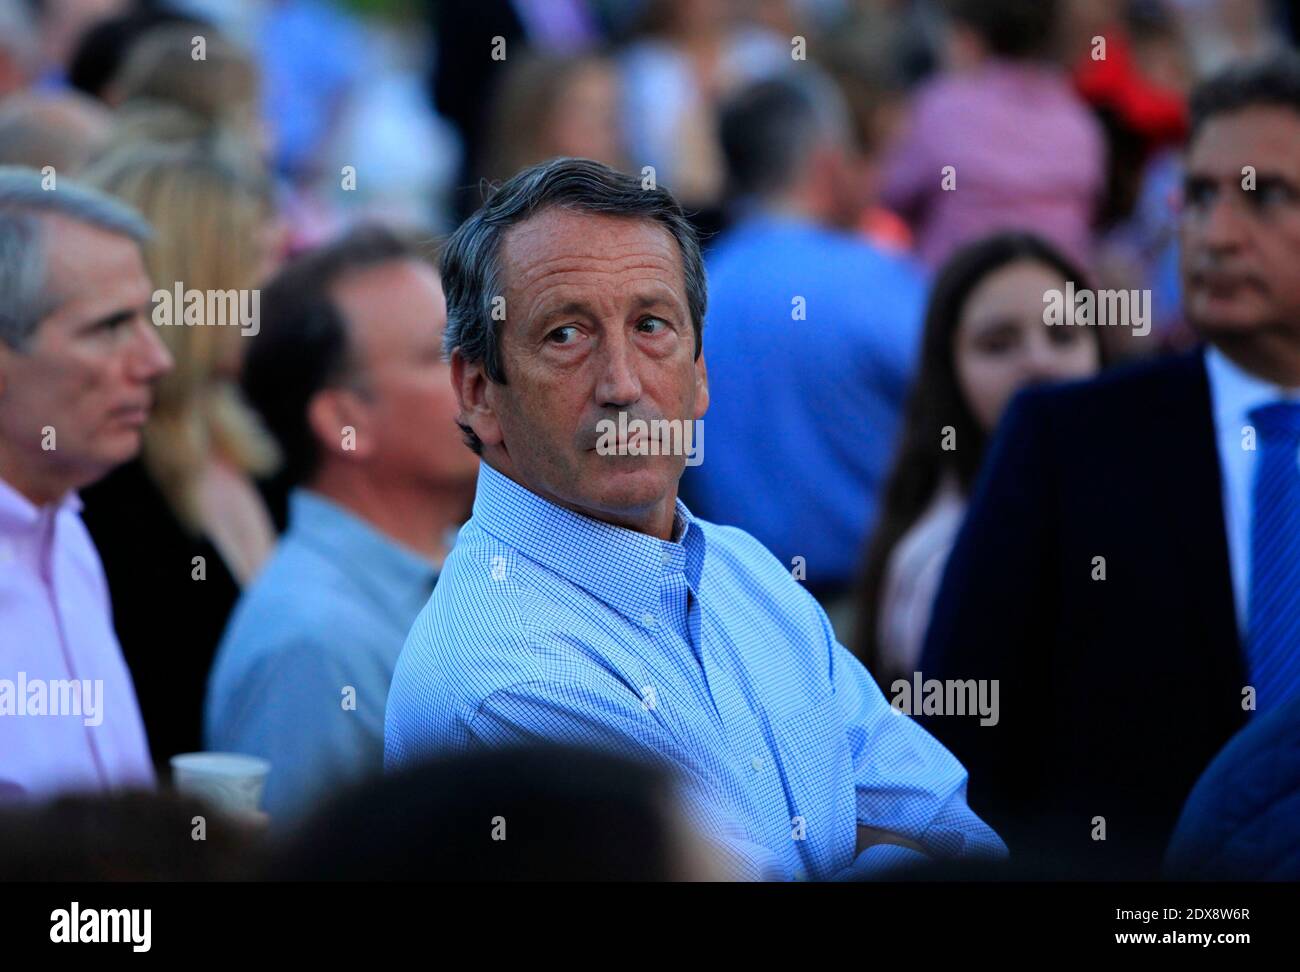 Representative Mark Sanford at the Congressional Picnic on the South Lawn of the White House in Washington, DC, USA, on September 17, 2014. Photo by Dennis Brack/Pool/ABACAPRESS.COM Stock Photo